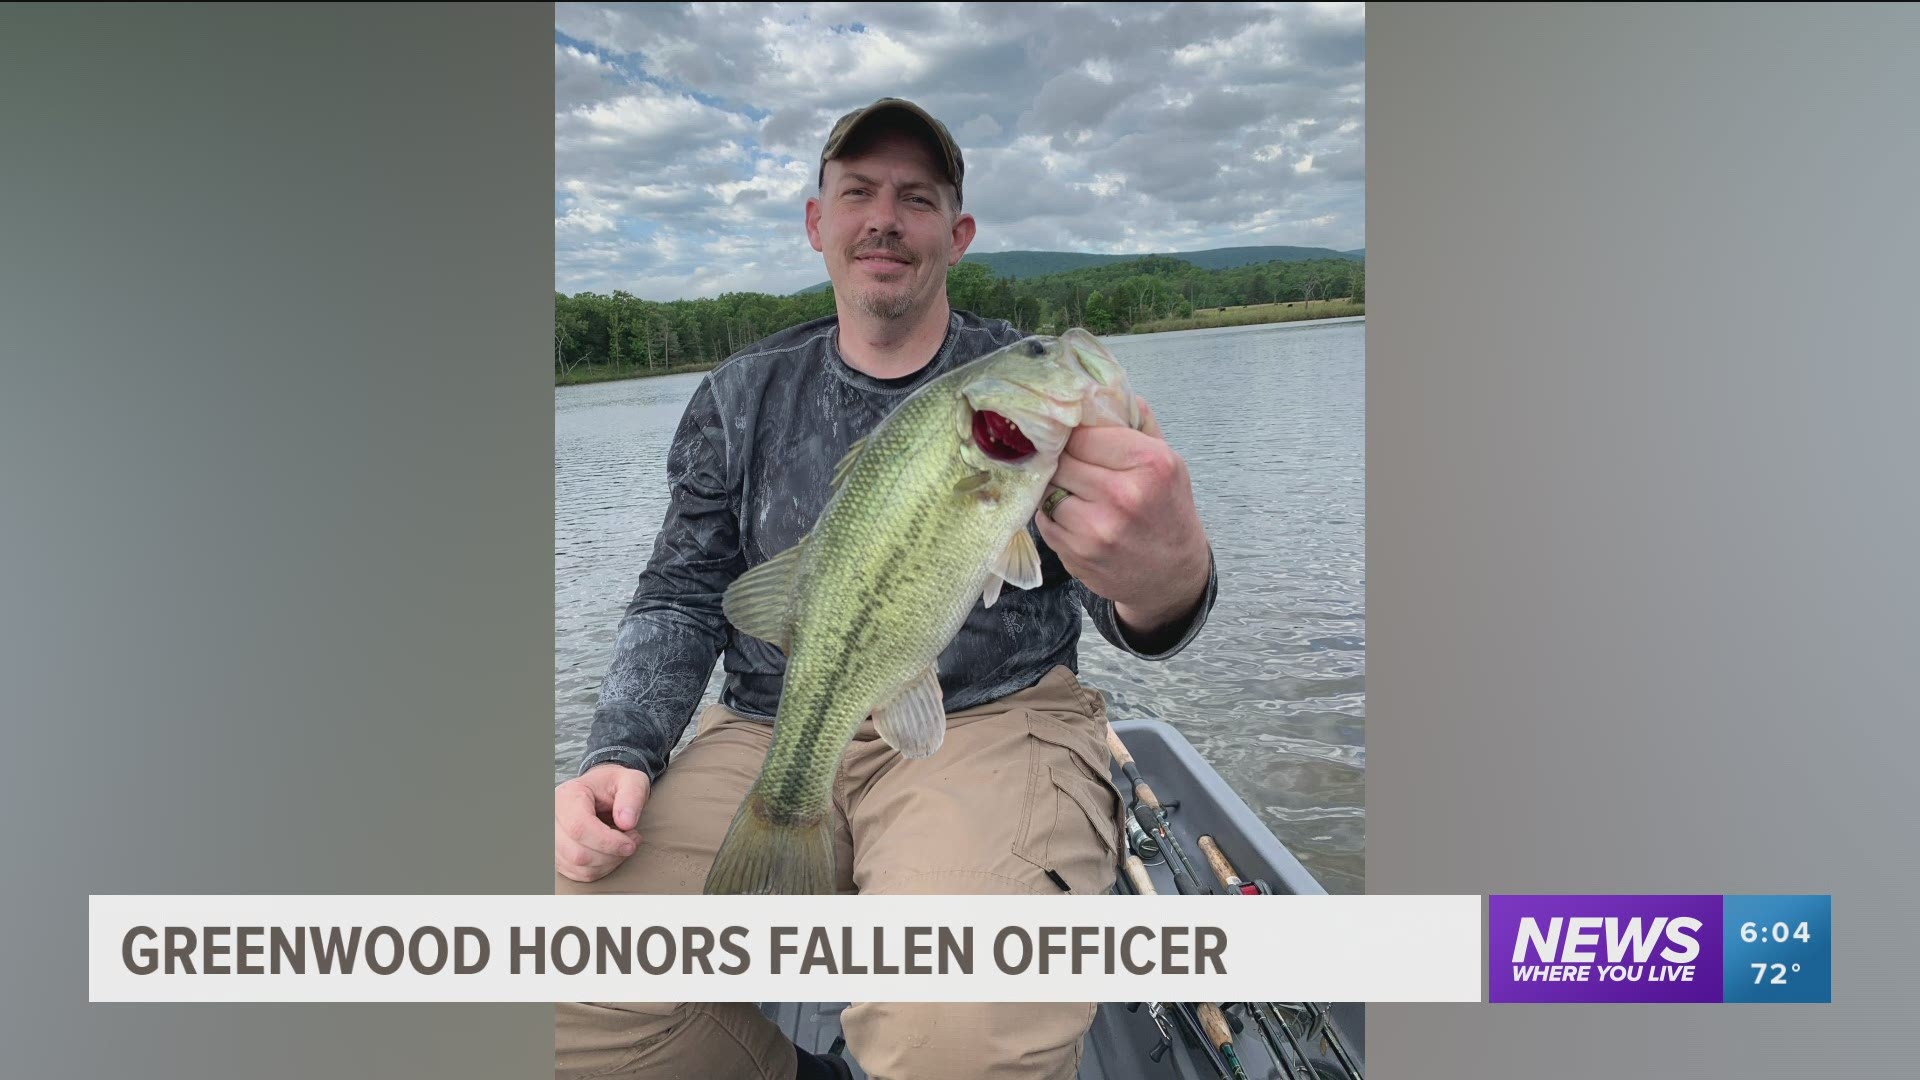 The Greenwood community is remembering a police officer who died after a five-year battle with cancer this week.